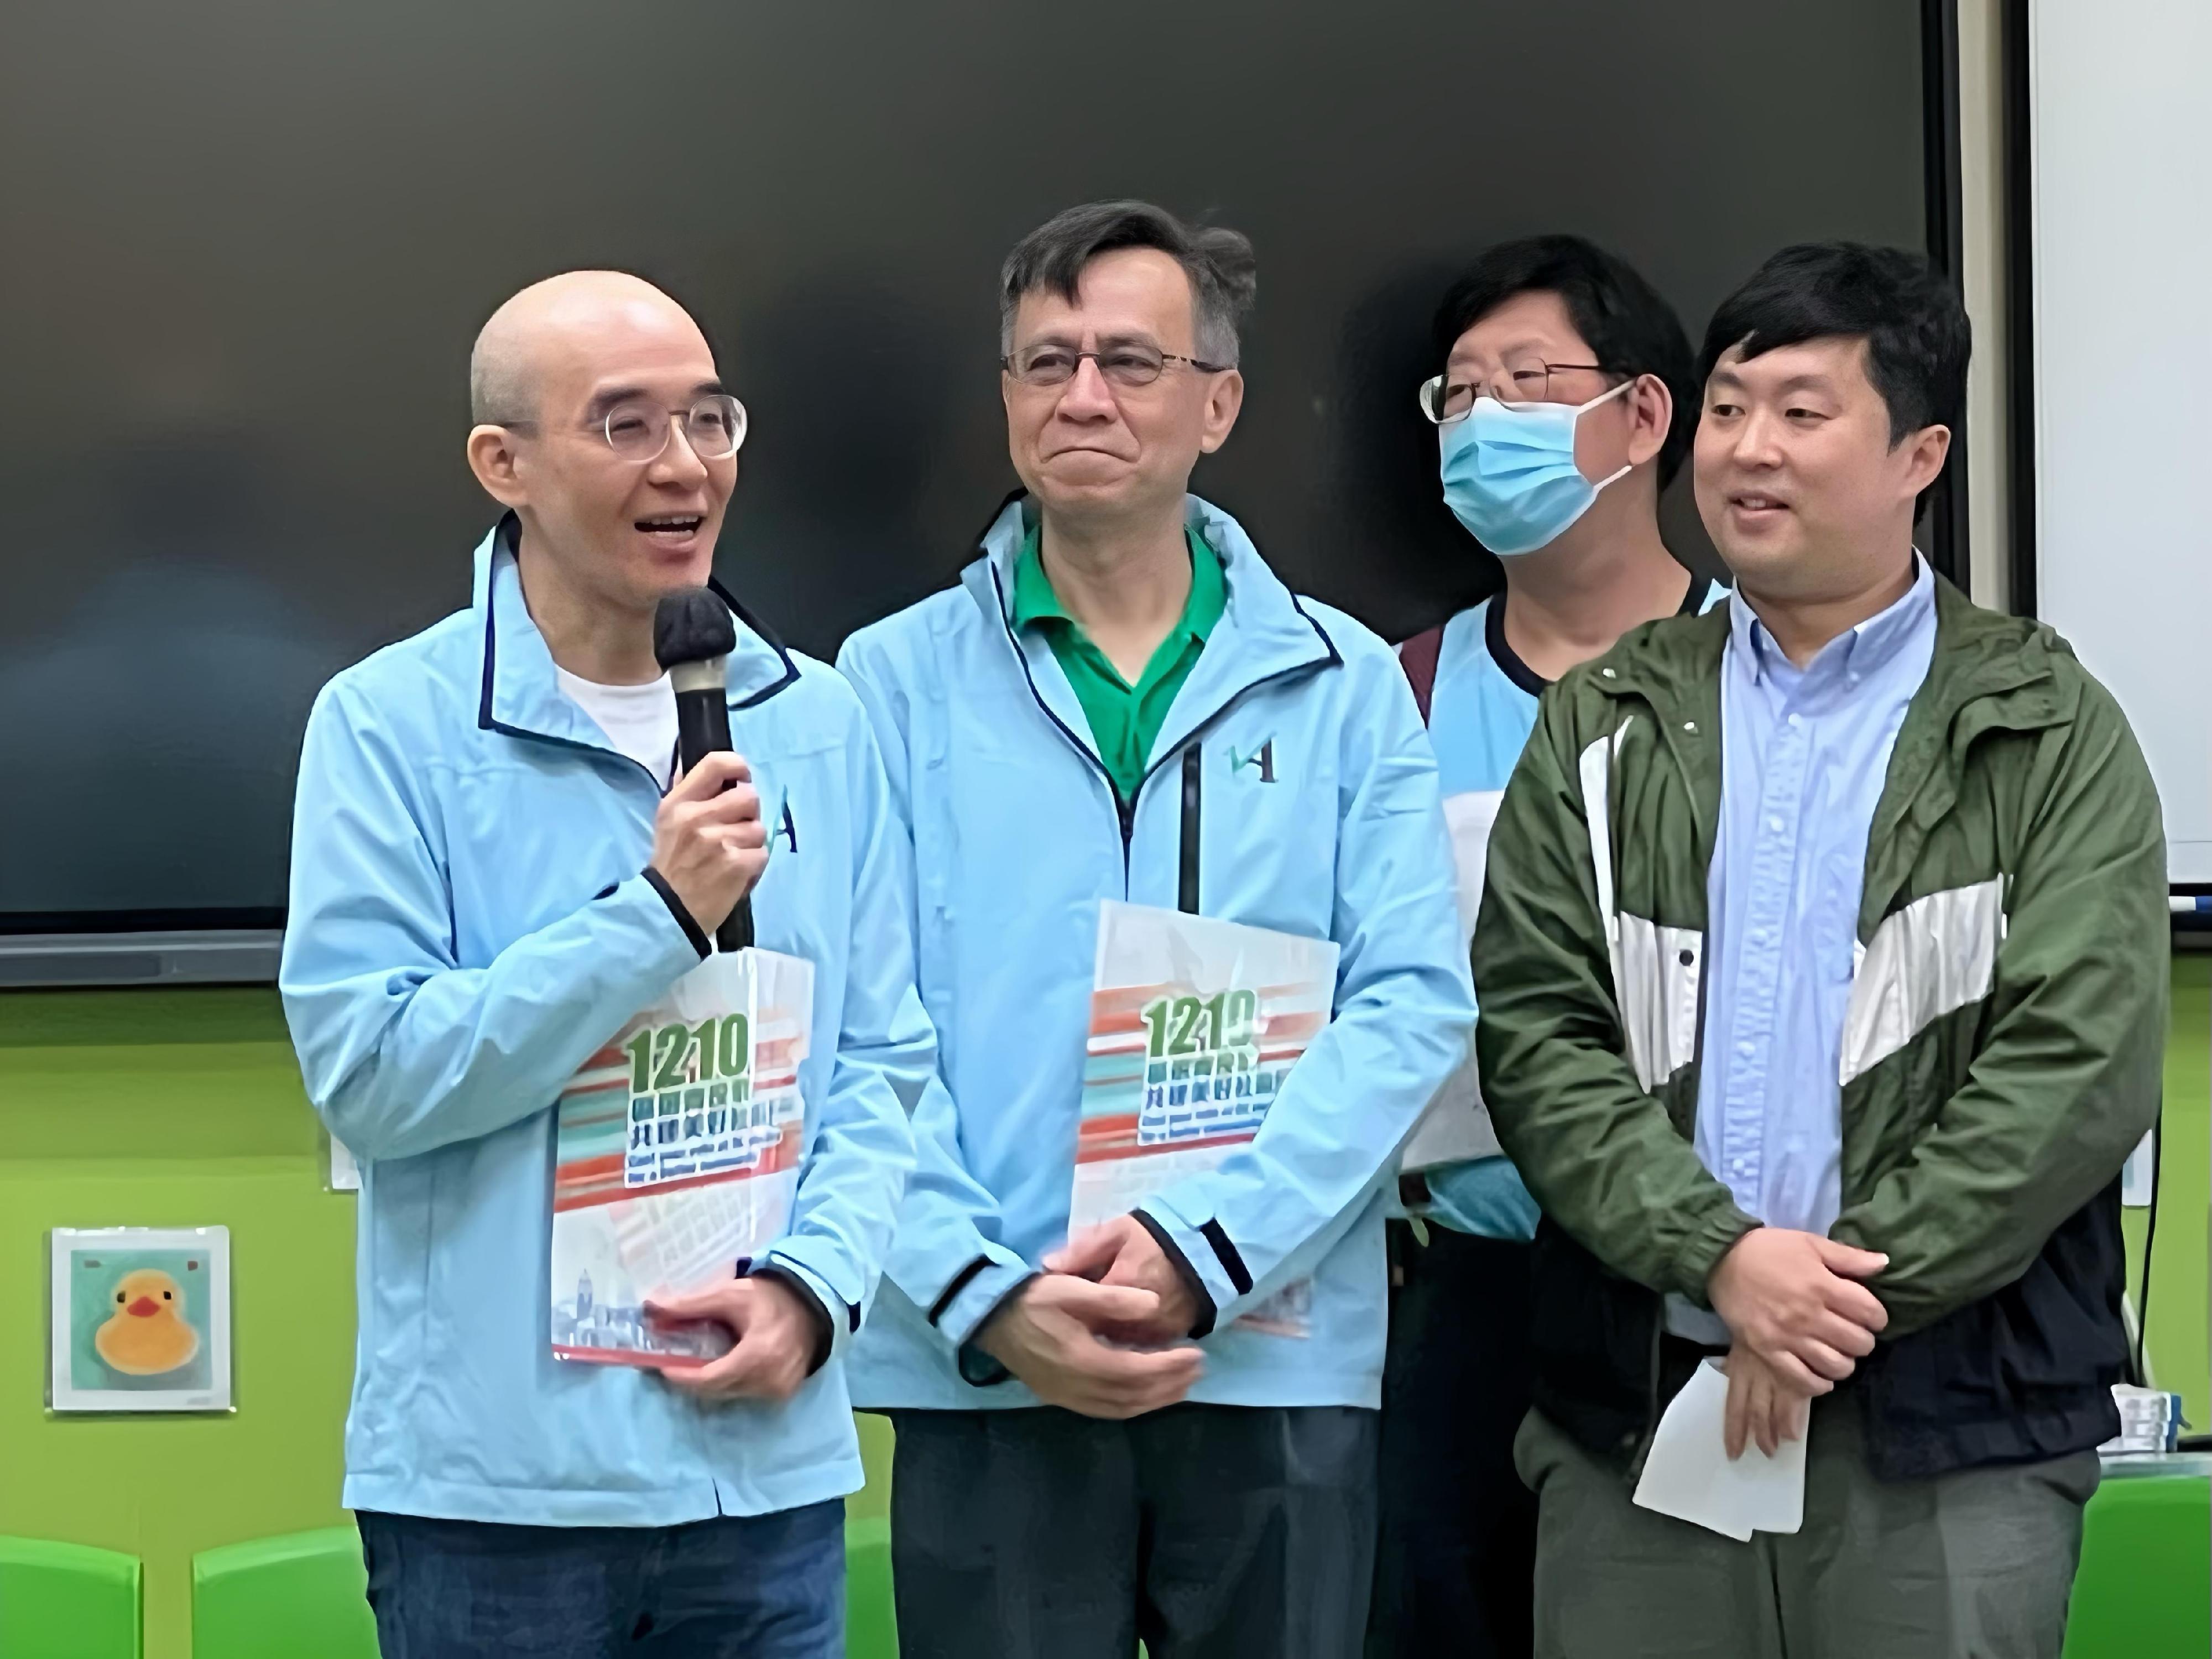 Around 30 volunteers from the Audit Commission takes part in volunteer visit to elderly centre and District Council election promotion activity today (December 2). Photo shows the Director of Audit, Professor Nelson Lam (first left), taking the opportunity to promote the District Council election in his speech, urging participants of the event to encourage their families and friends to vote.